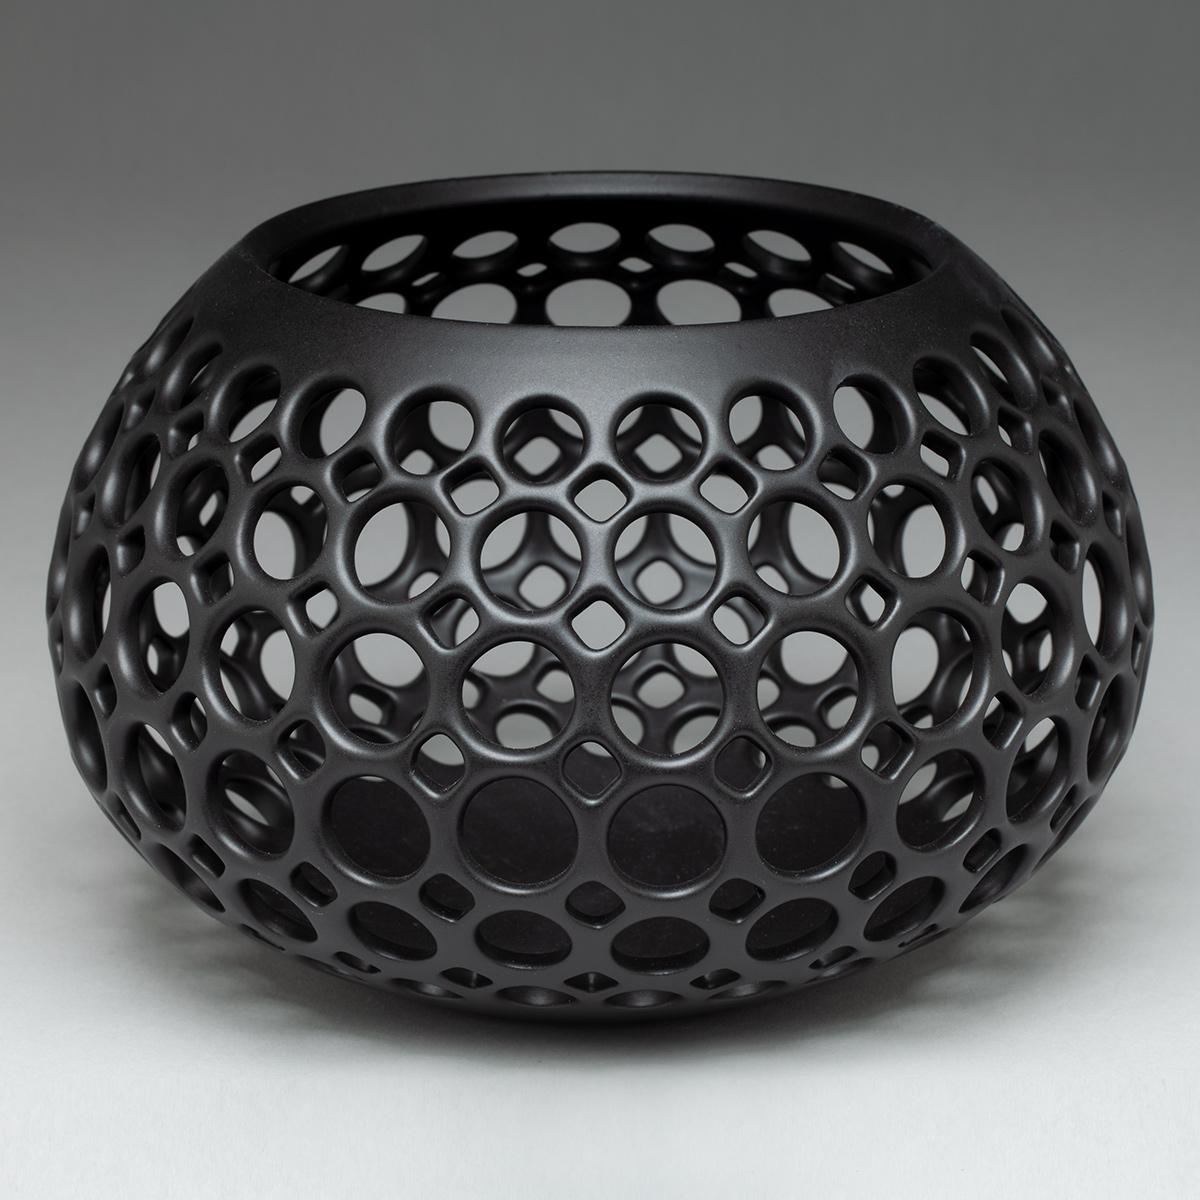 American Small Black Pierced Wide Teardrop Shaped Tabletop Sculpture or Candleholder For Sale